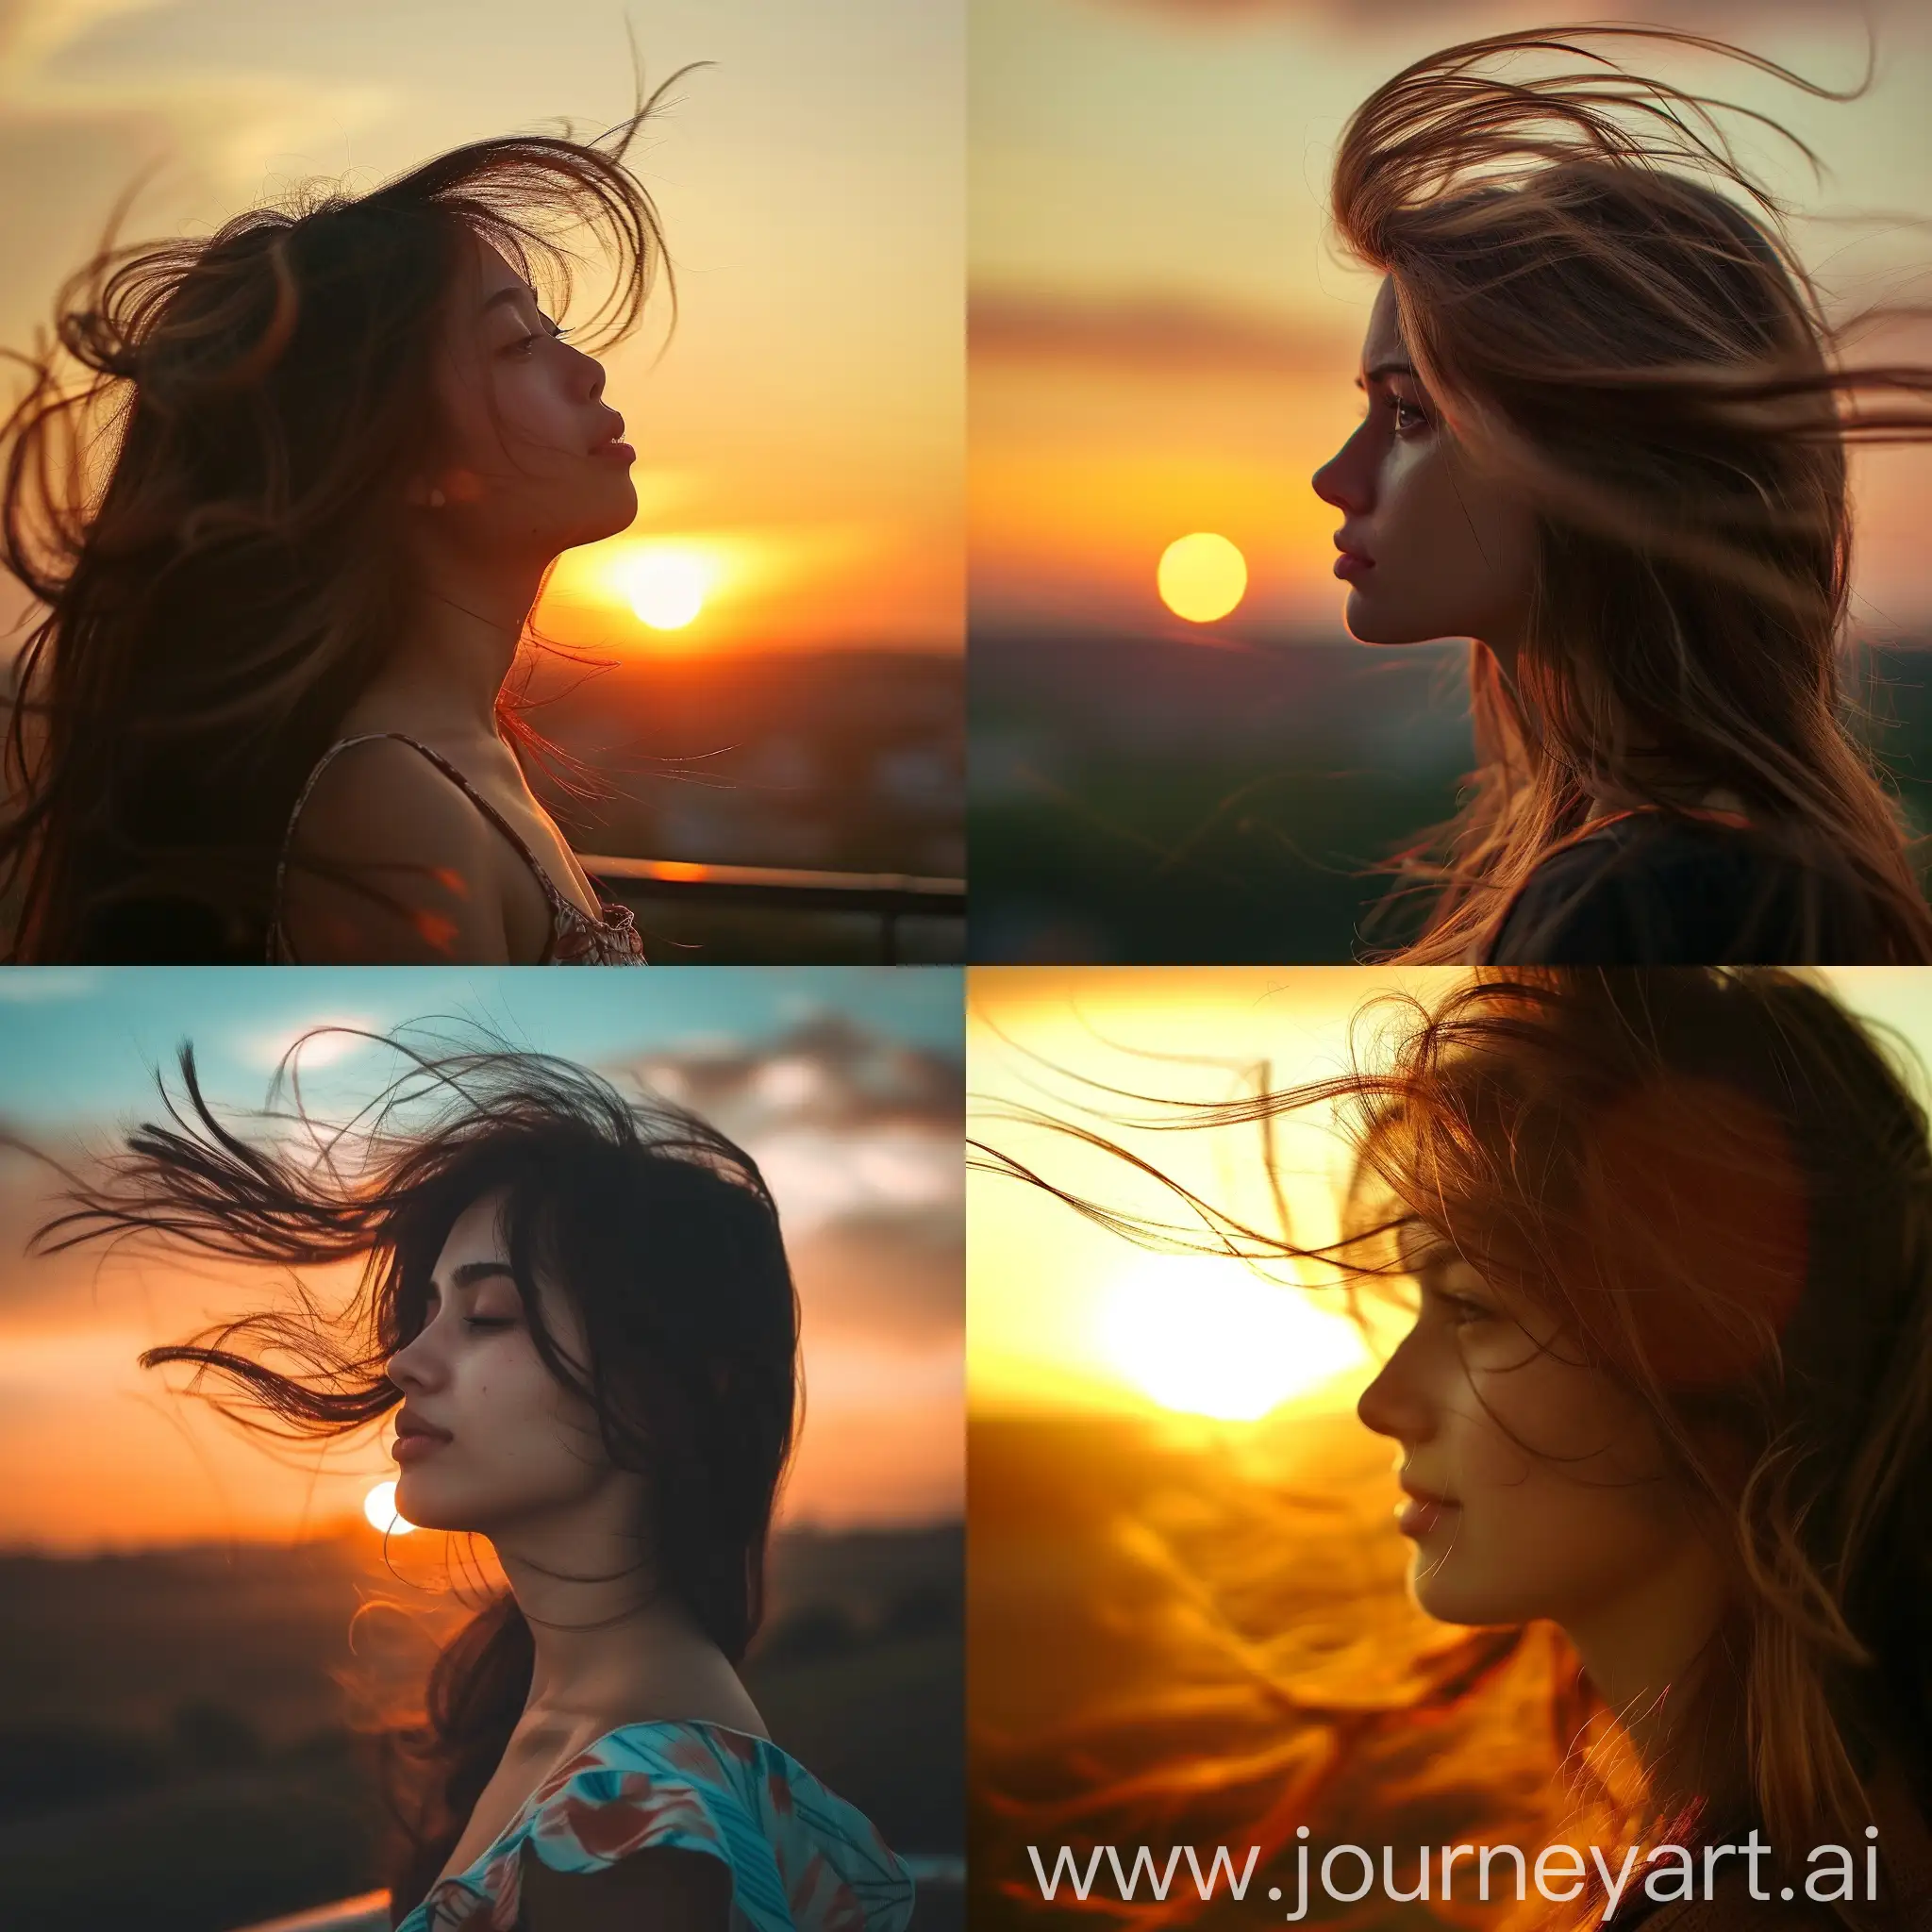 A young, pretty lady looking at the  in a sunsetting evening an her hair waving in the air